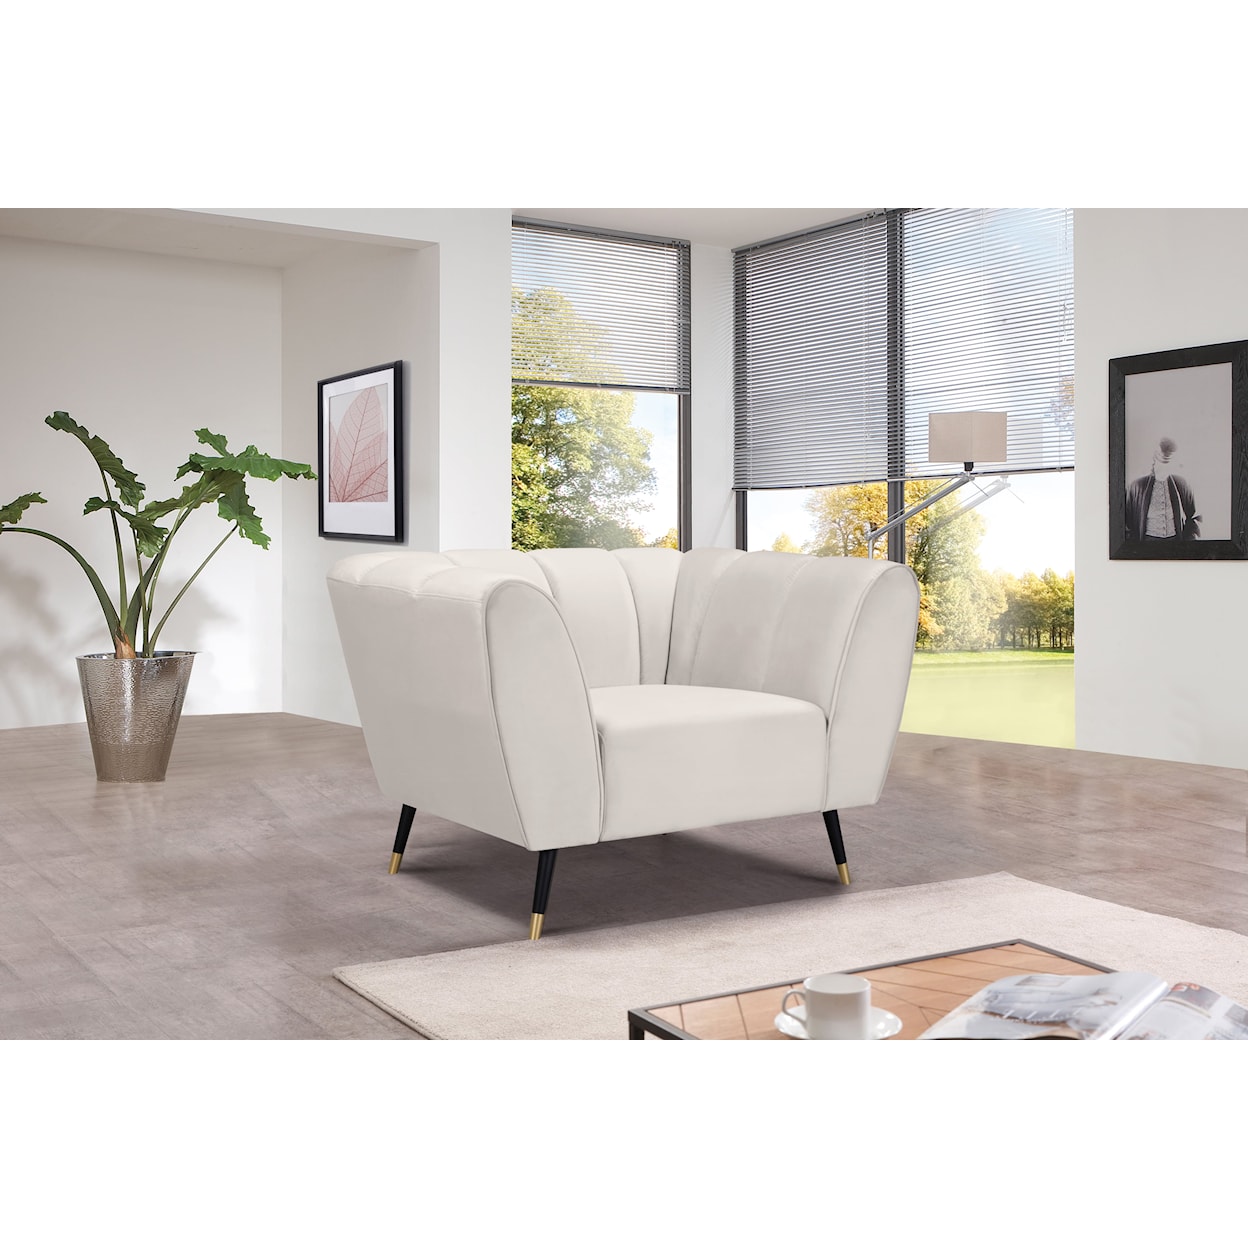 Meridian Furniture Beaumont Chair